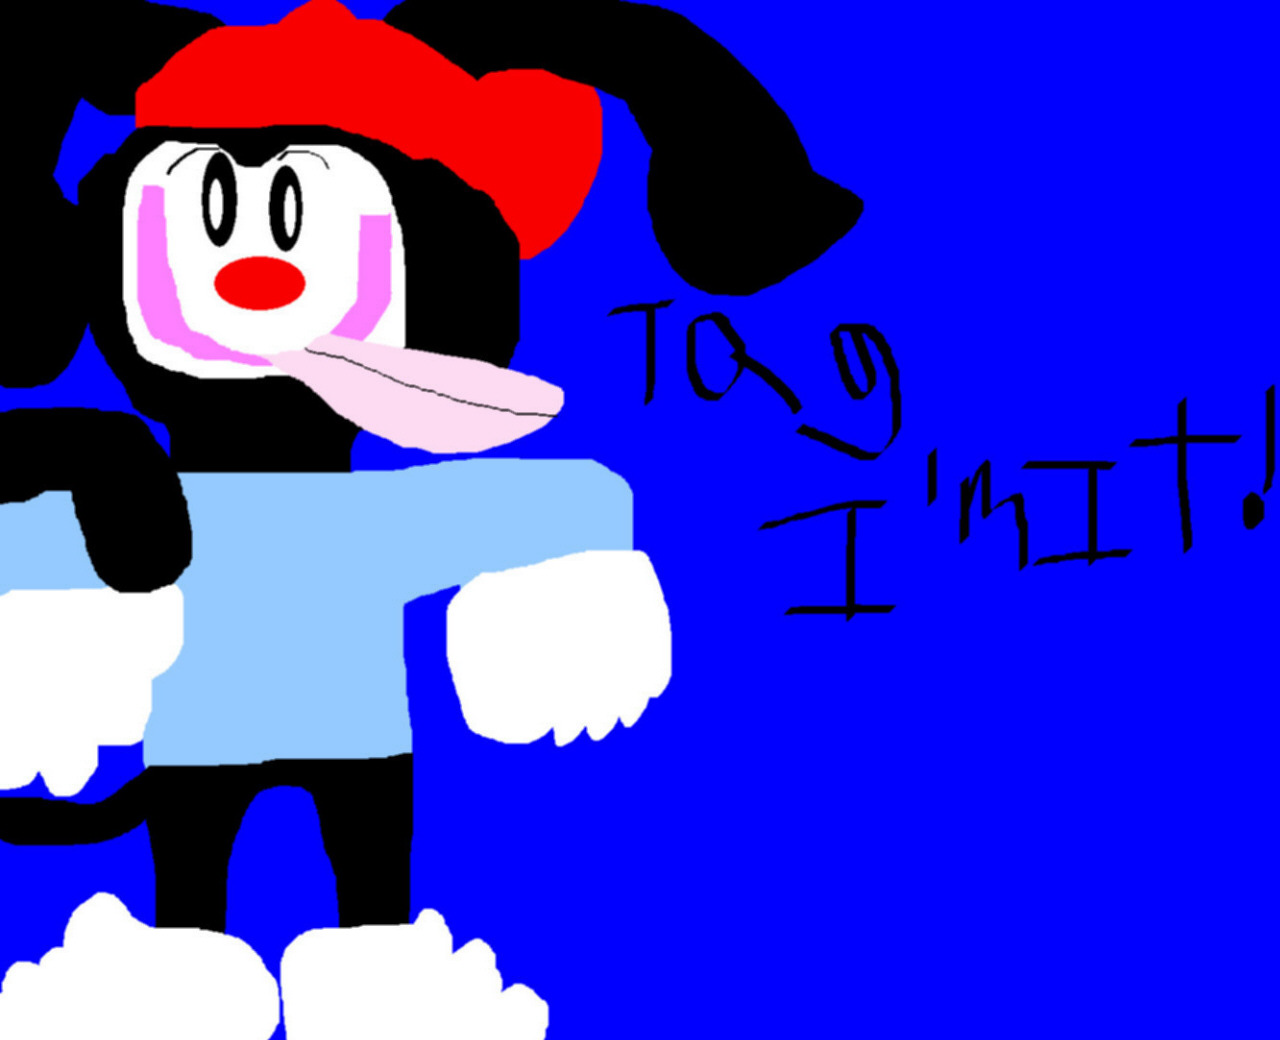 Tag I'M It Random Wakko Playing Tail Tag With Himself MS Paint by Falconlobo